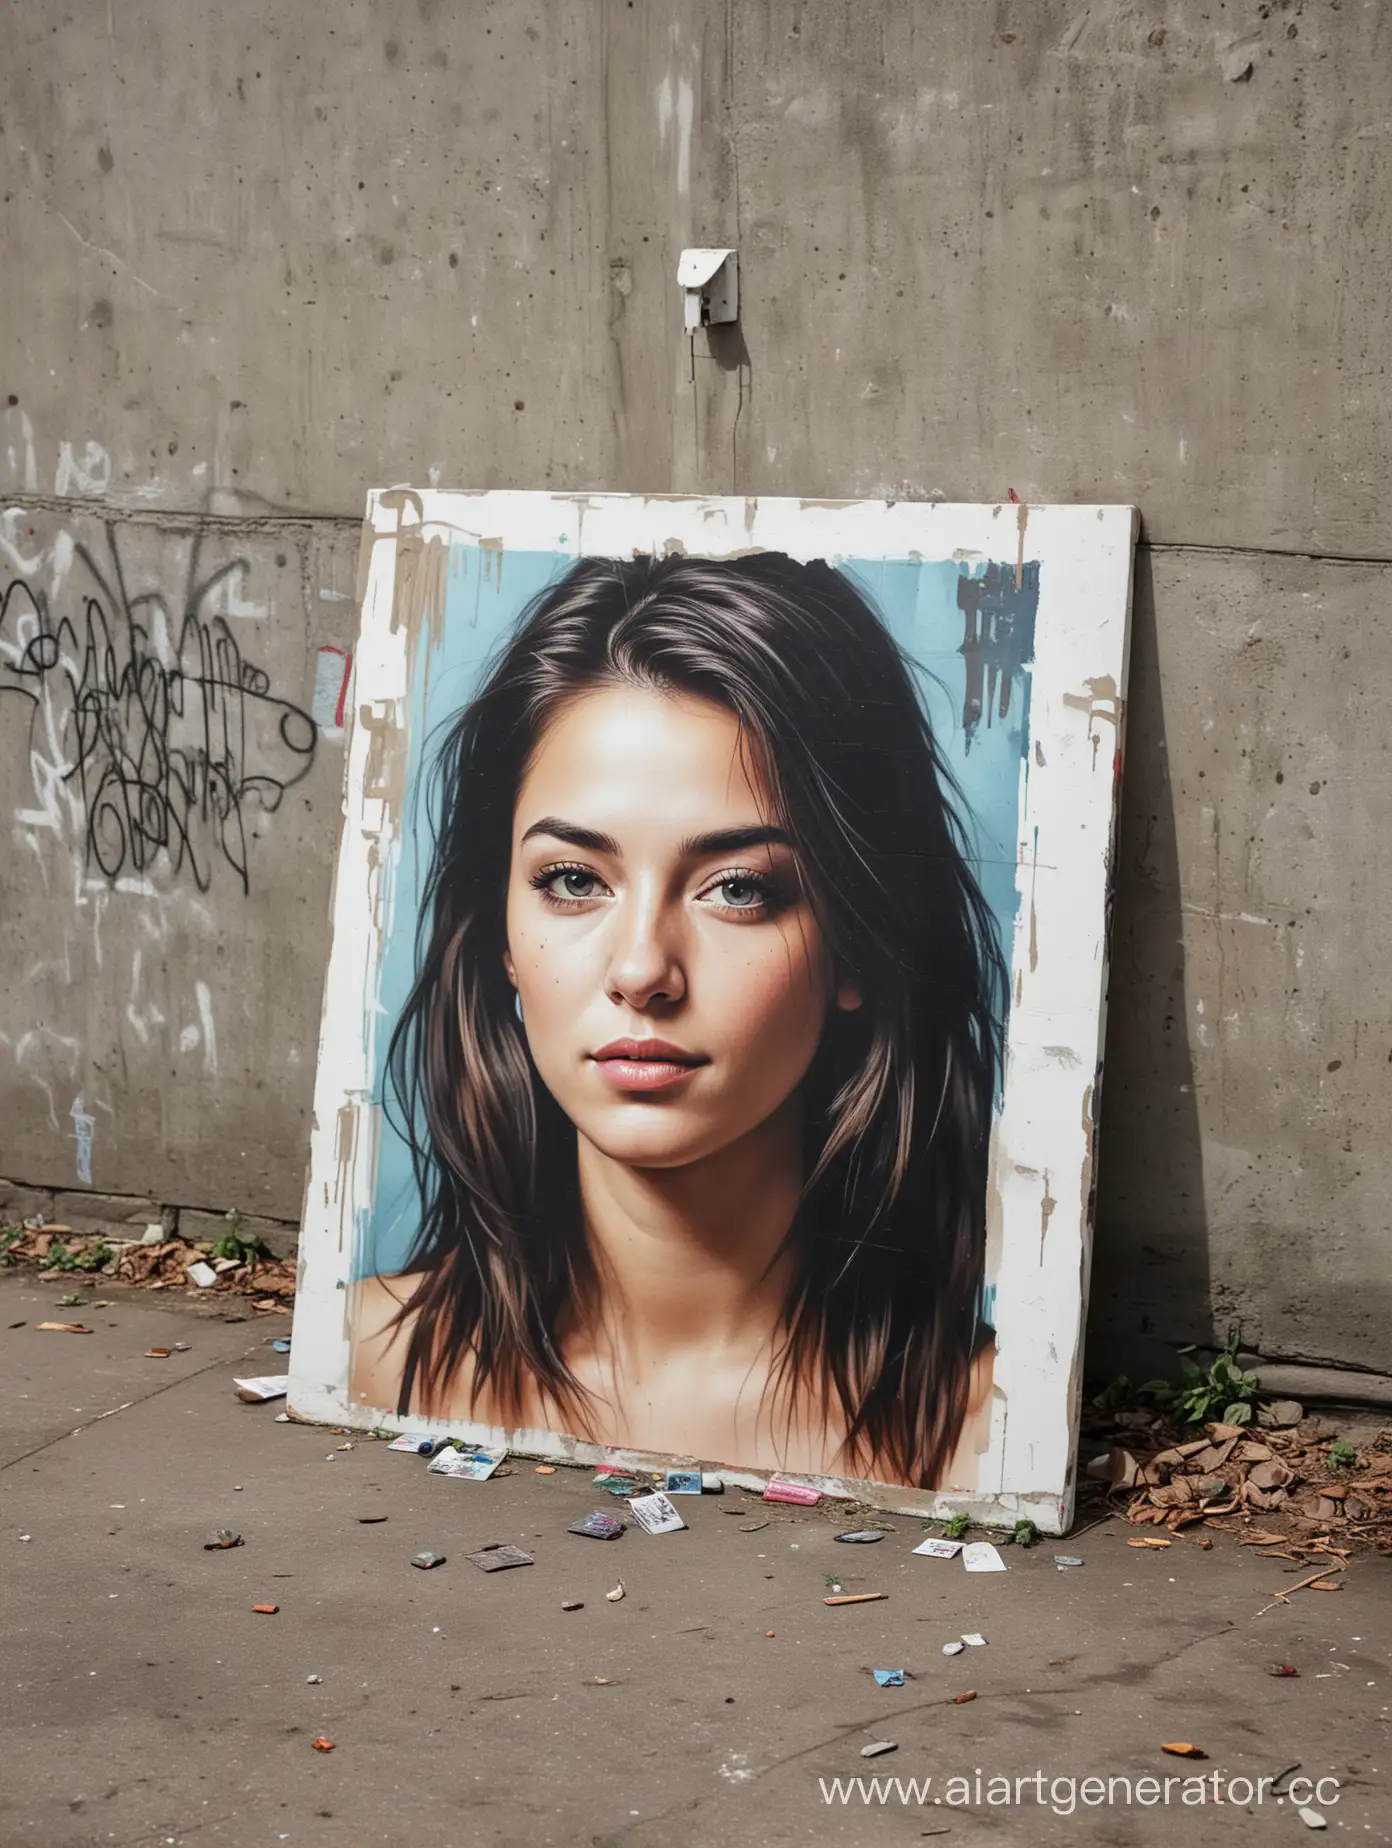 A portrait on canvas stands on the floor in a park, leaning against a graffiti wall.